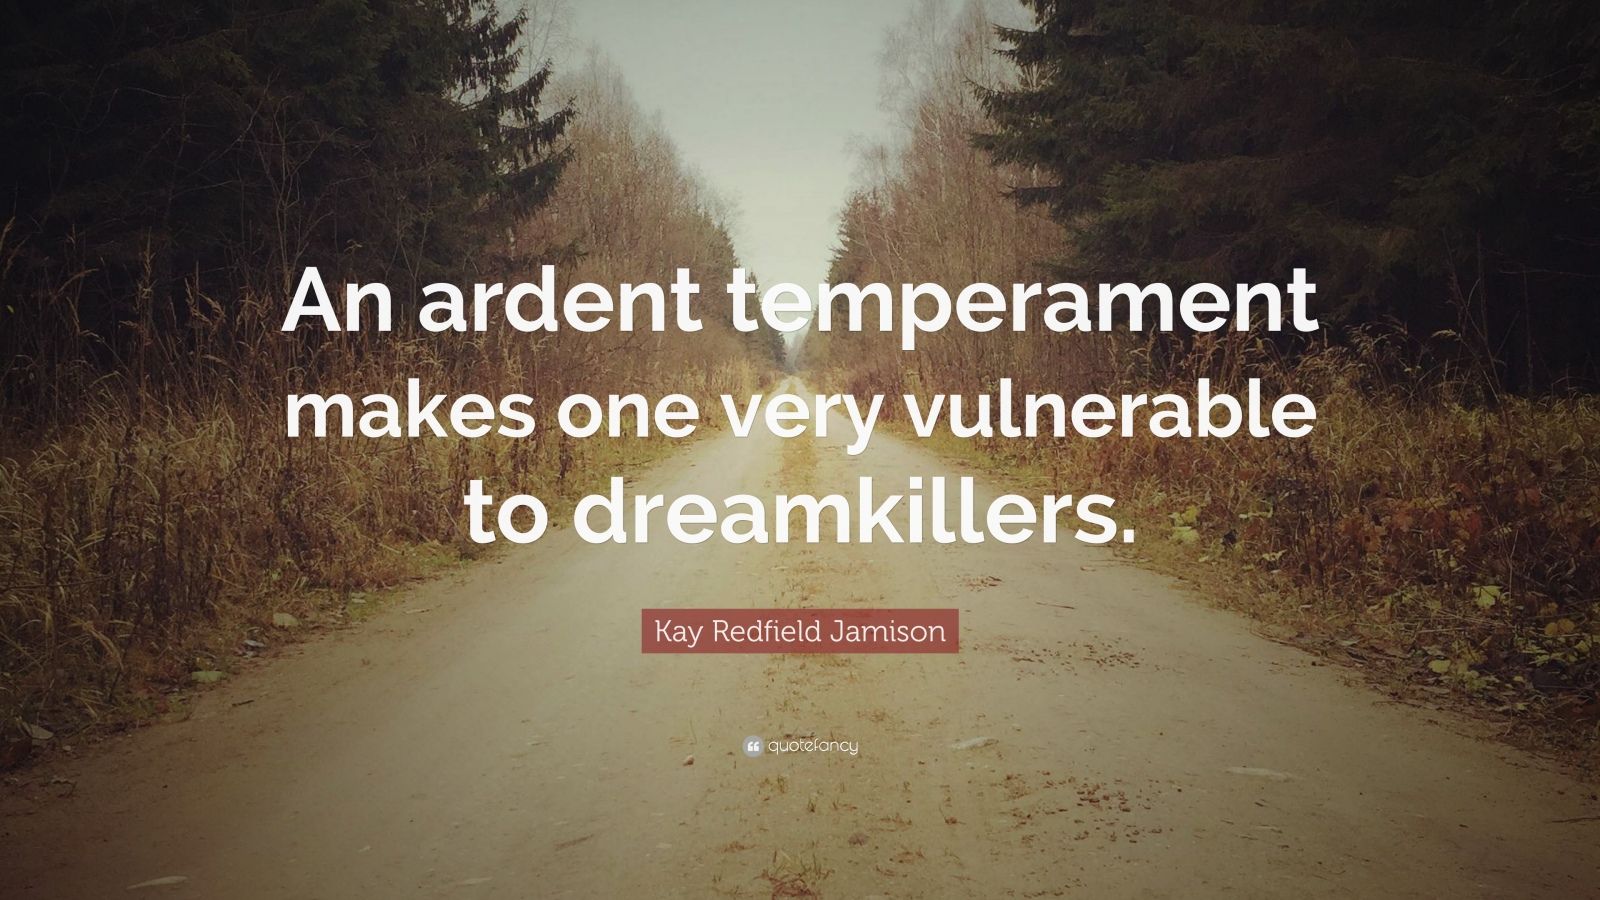 Kay Redfield Jamison Quote: “An ardent temperament makes one very ...